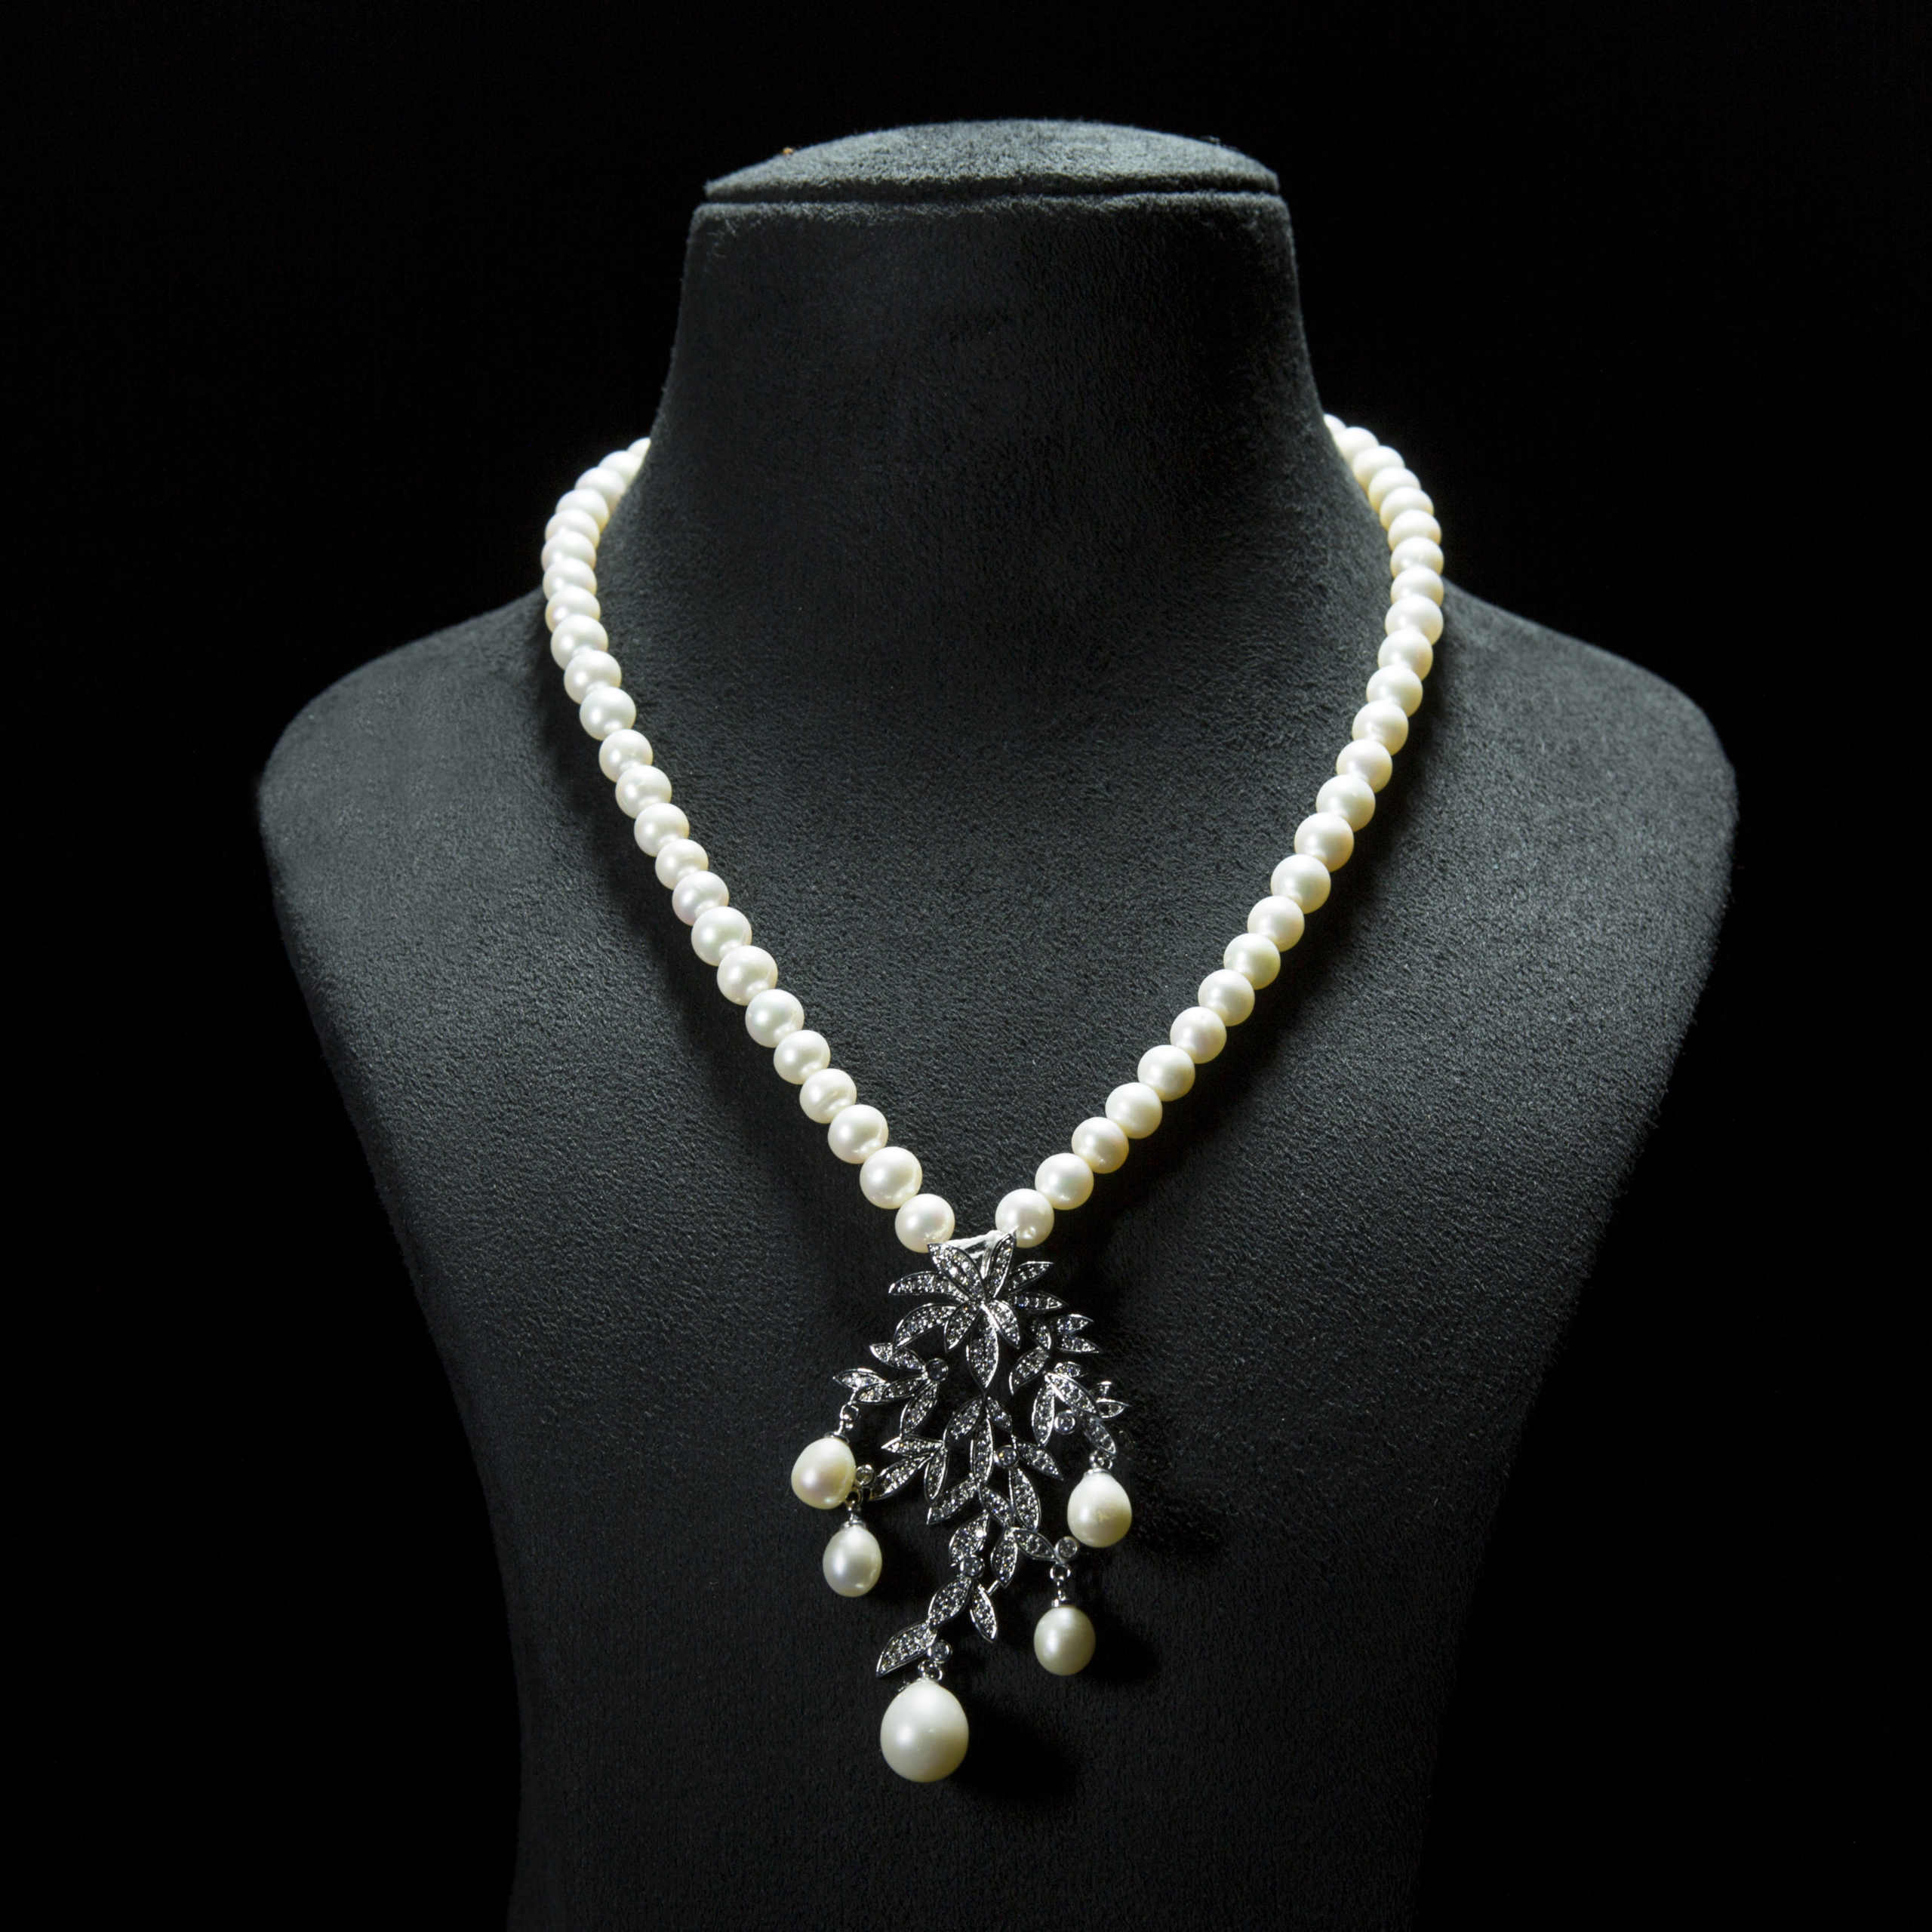 Diamond Necklace 001-165-00226 14KW - Diamond Necklaces | P.J. Rossi  Jewelers | Lauderdale-By-The-Sea, FL